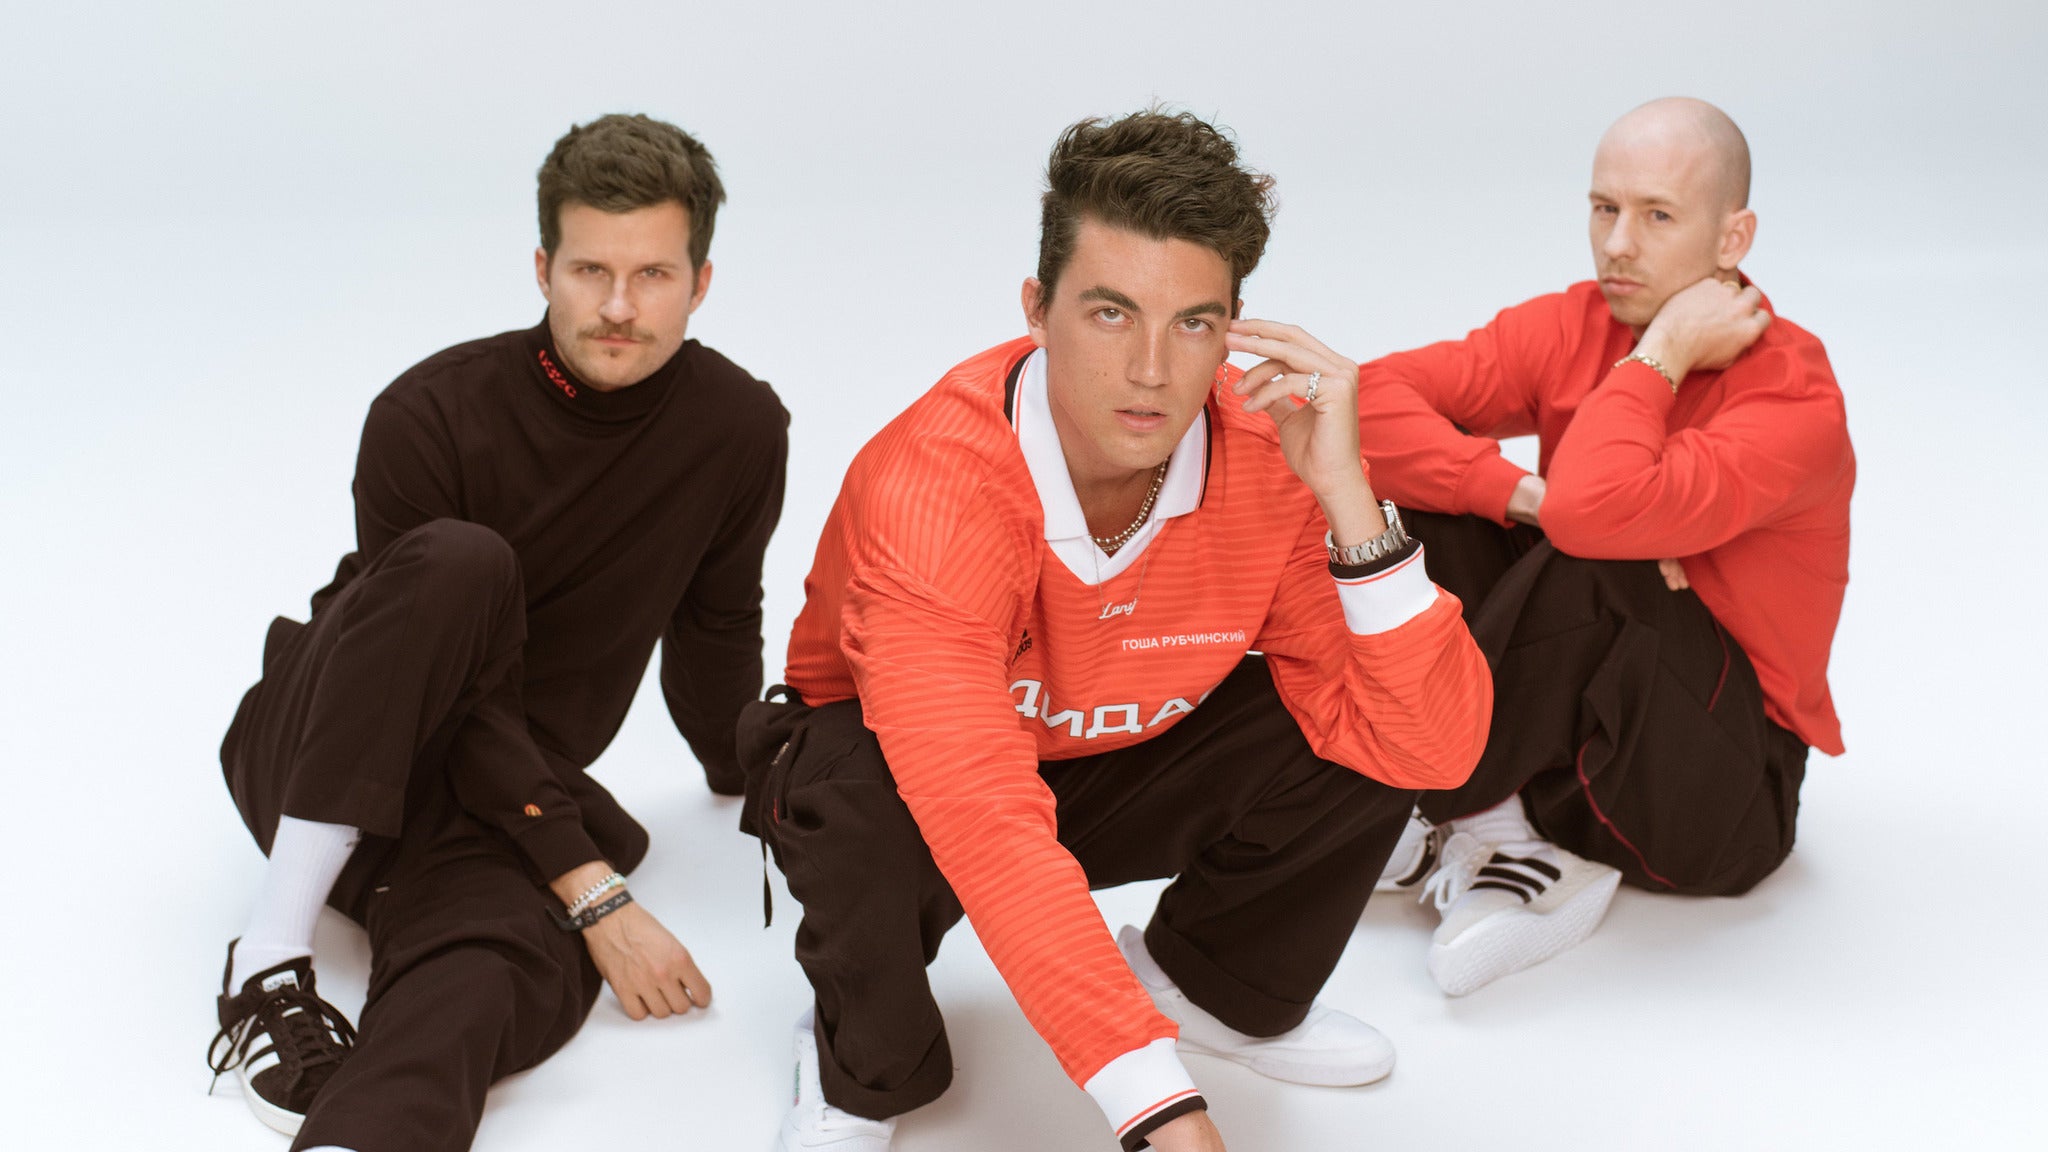 LANY in New York promo photo for Spotify presale offer code